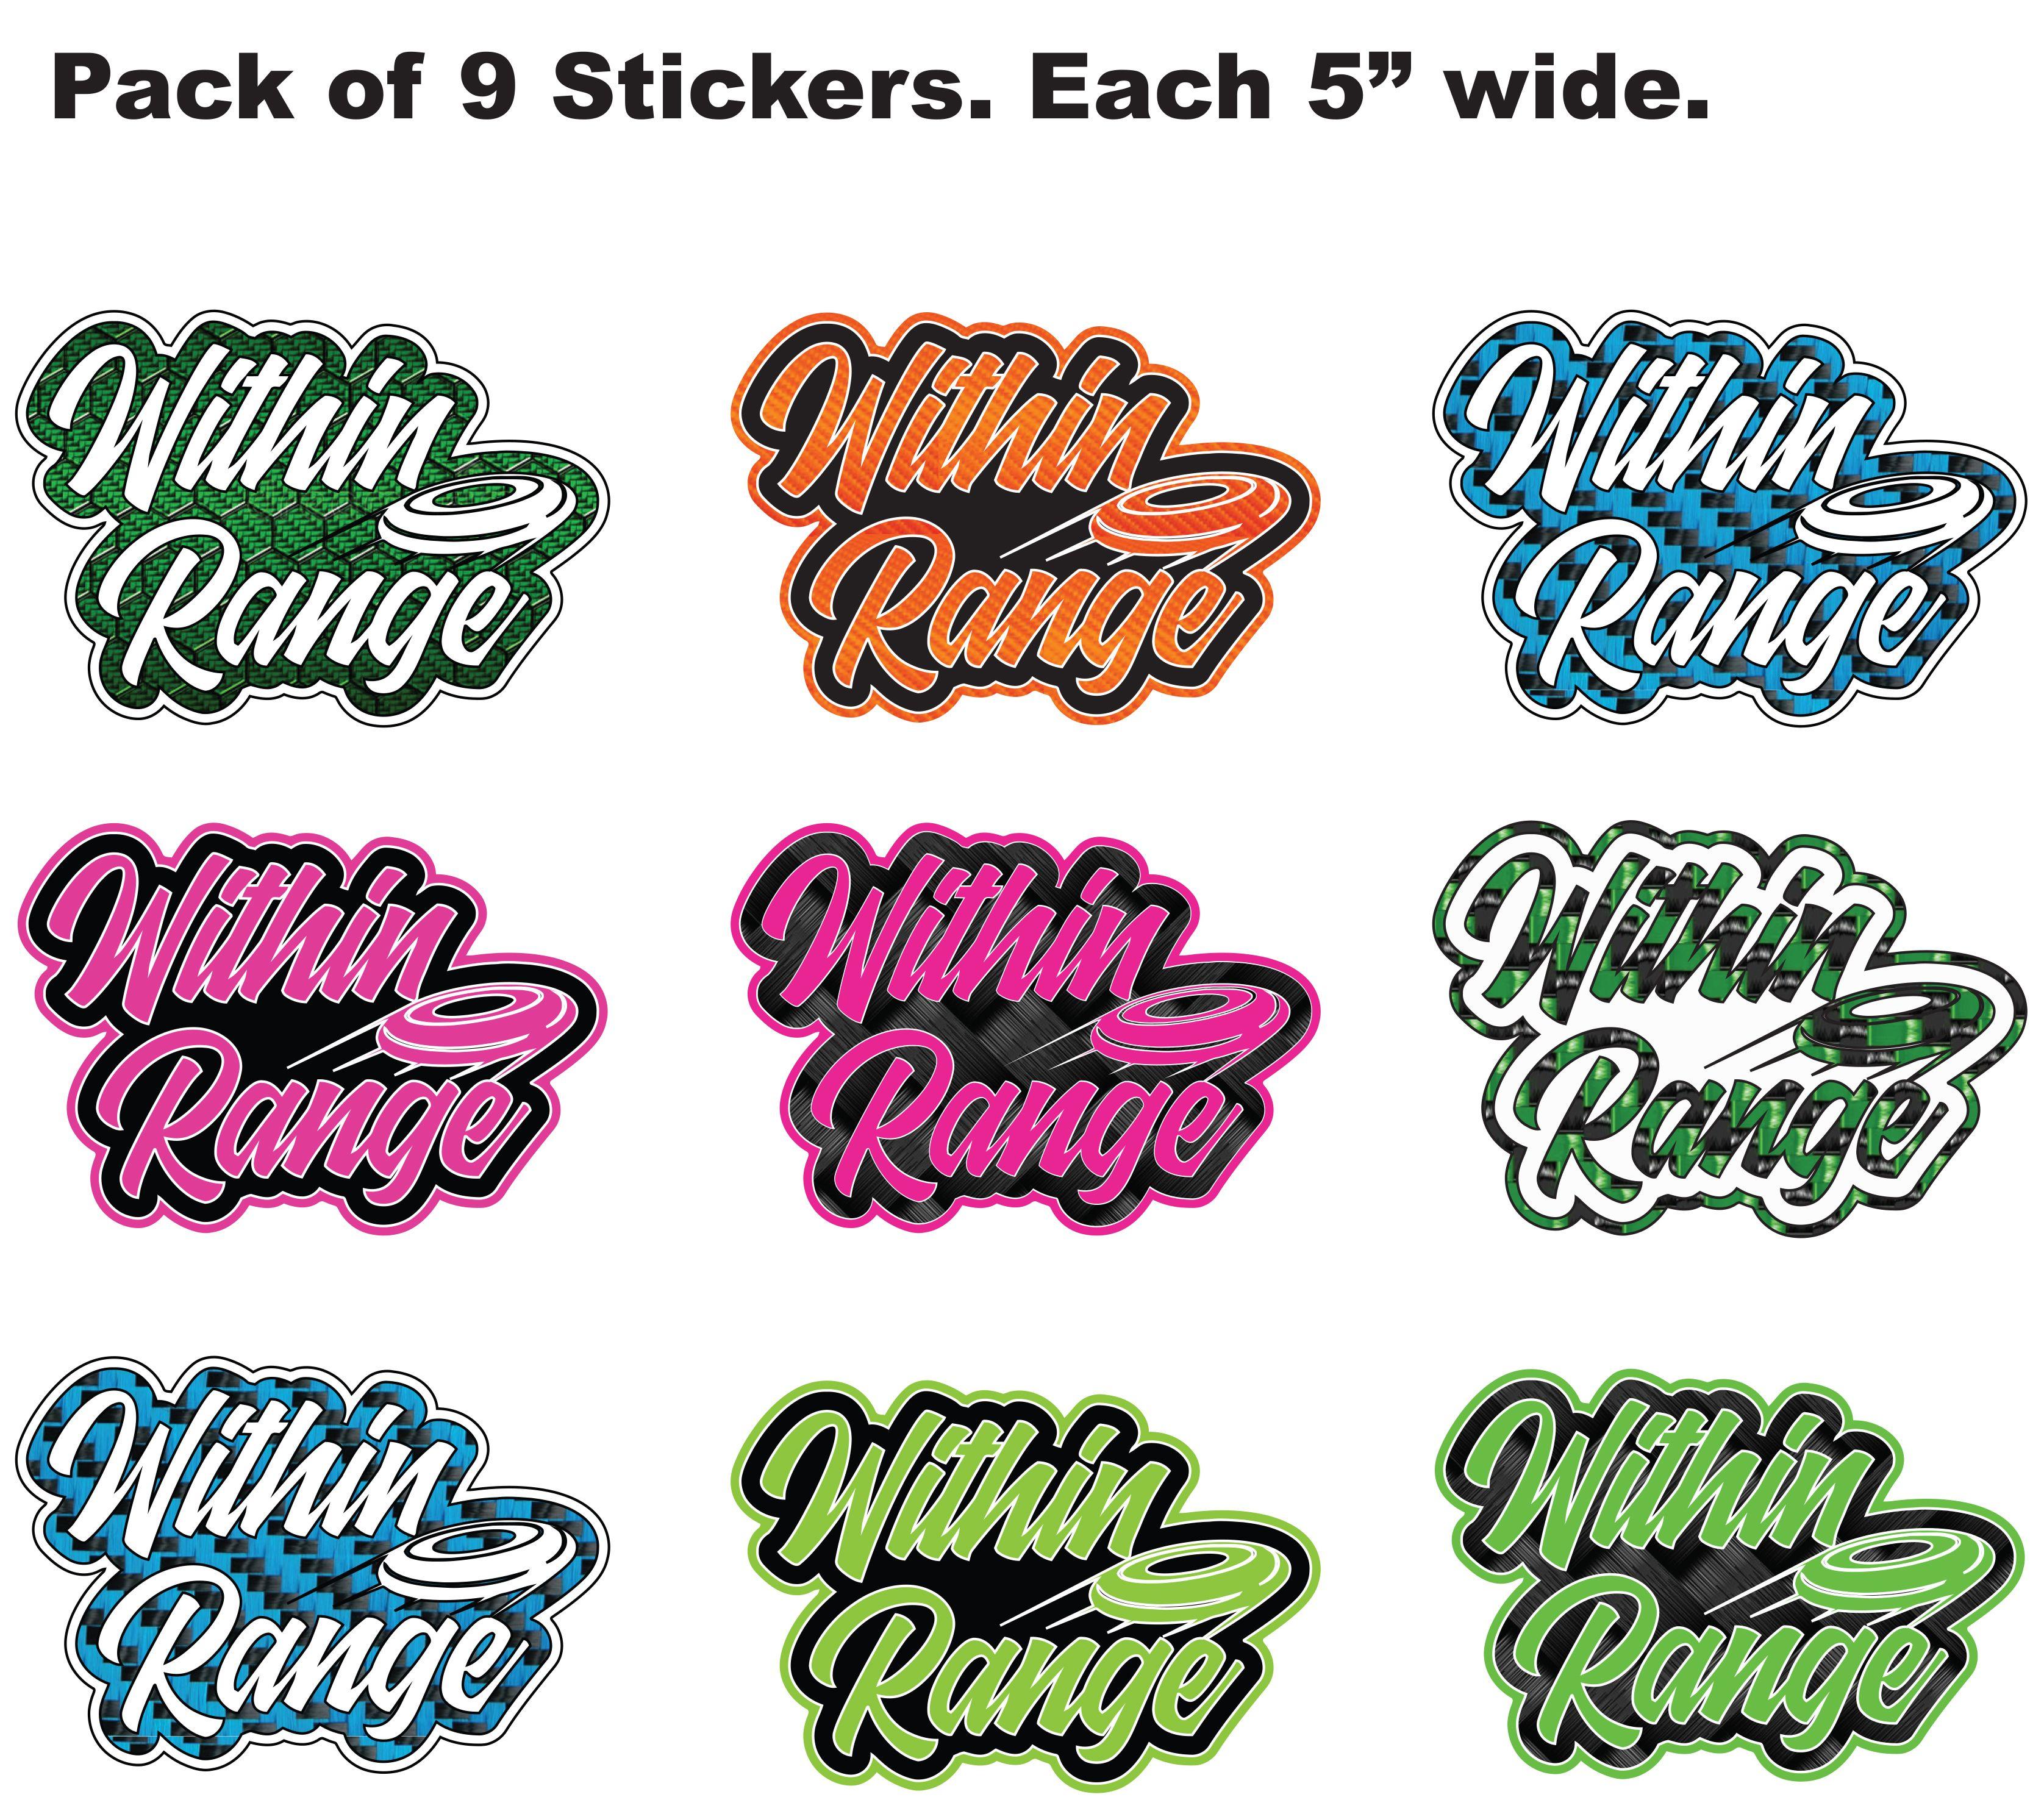 Stickers Logo - WITHIN RANGE Sticker Pack - Non-Target Logo -Shipping Included.